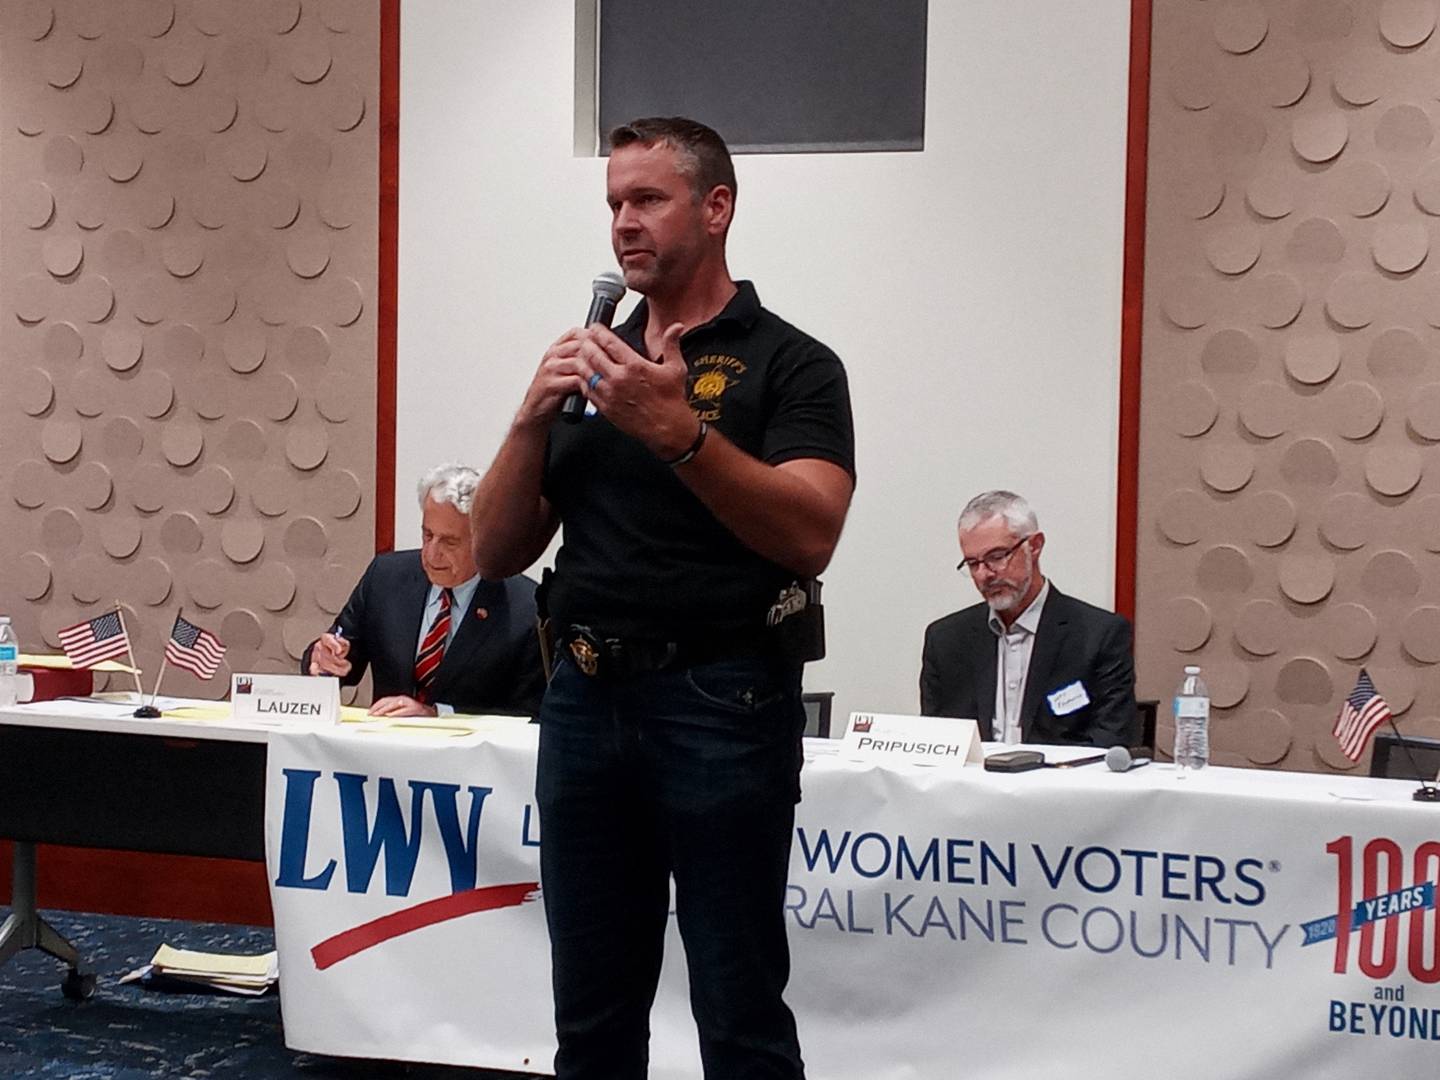 Democrat incumbent Sheriff Ron Hain presents his 2-minute platform for re-election at a League of Women Voters of Central Kane County candidate forum Sept. 27. Because his opponent in the Nov. 8 general election did not attend, Hain could not answer questions, per League rules.